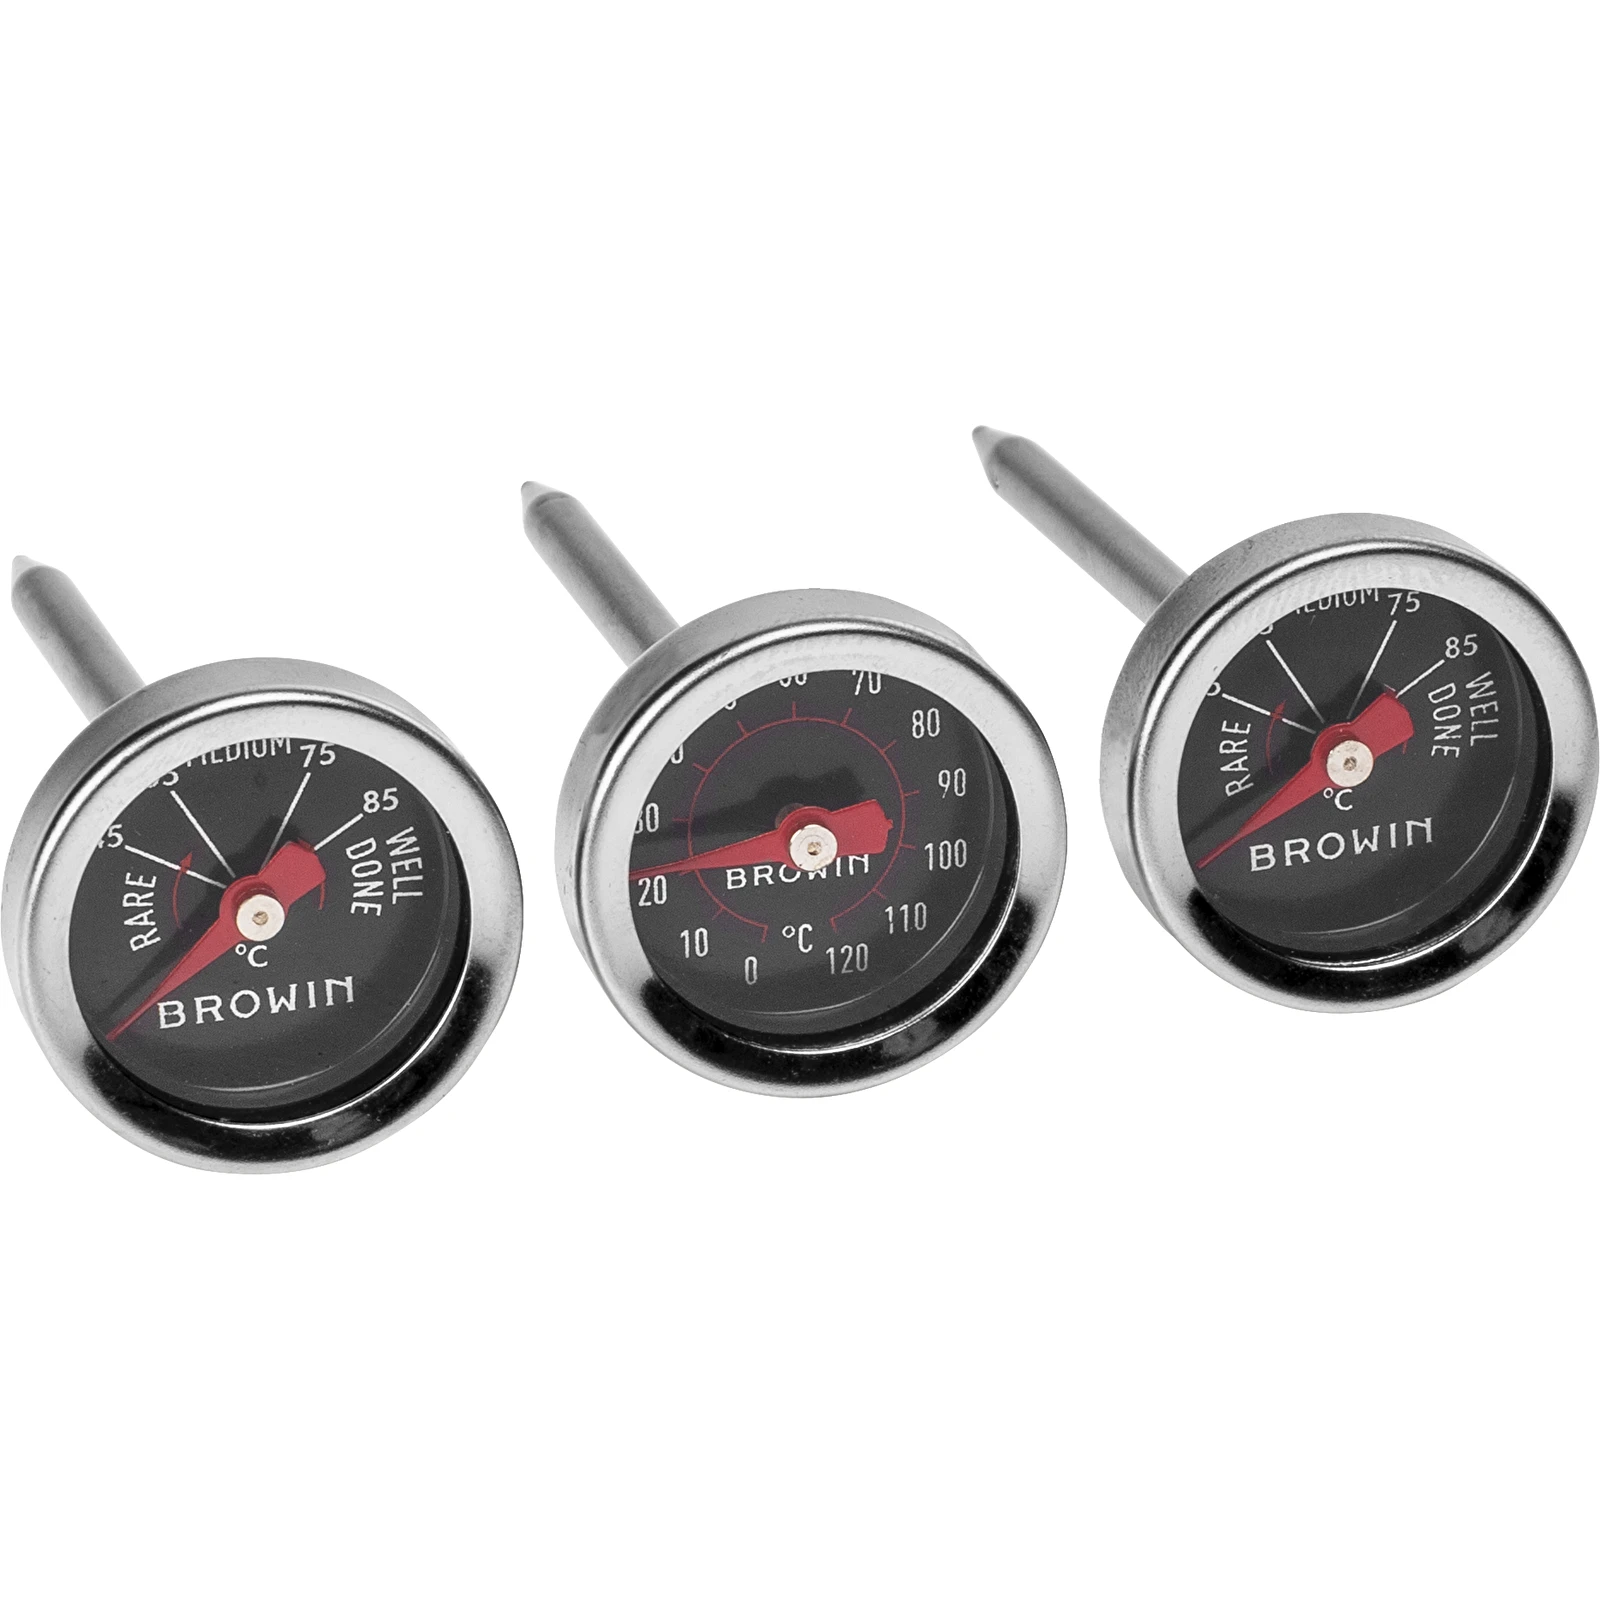 Mini Steak Thermometers, Set of 4 - Little Obsessed